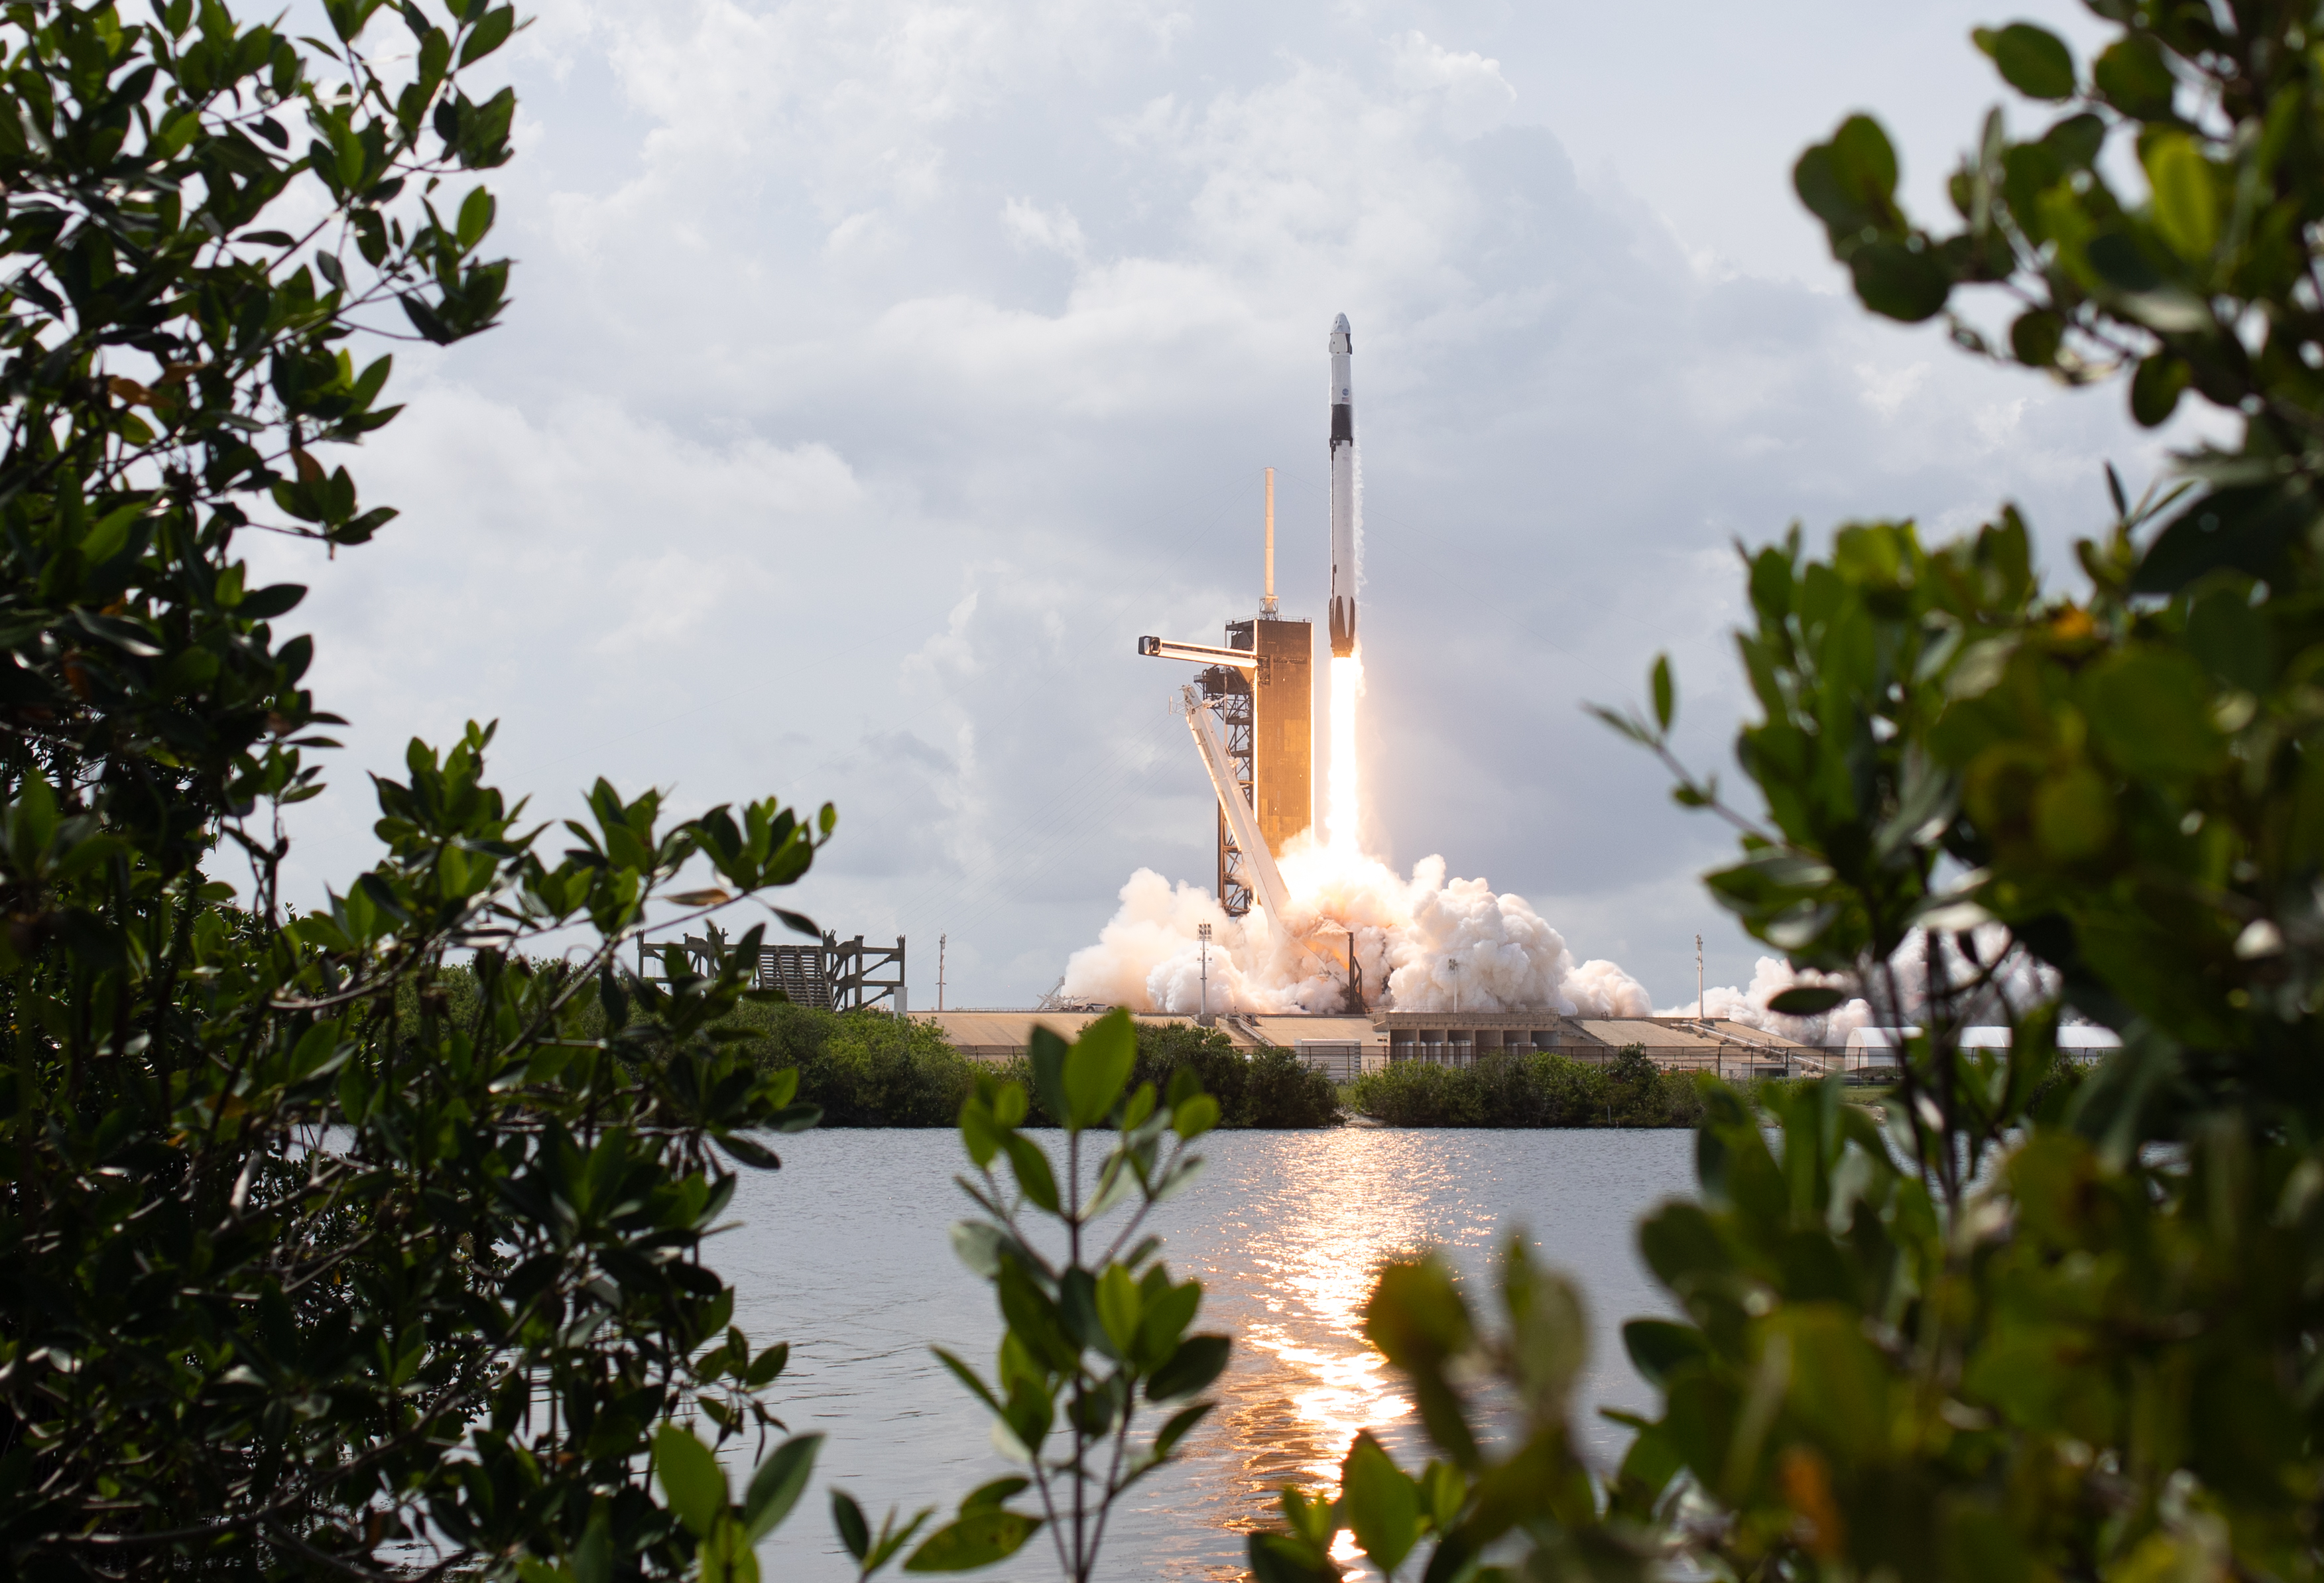 launch of SpaceX Crew Dragon aboard the company's Falcon9 rocket on May 30, 2020, from NASA KSC